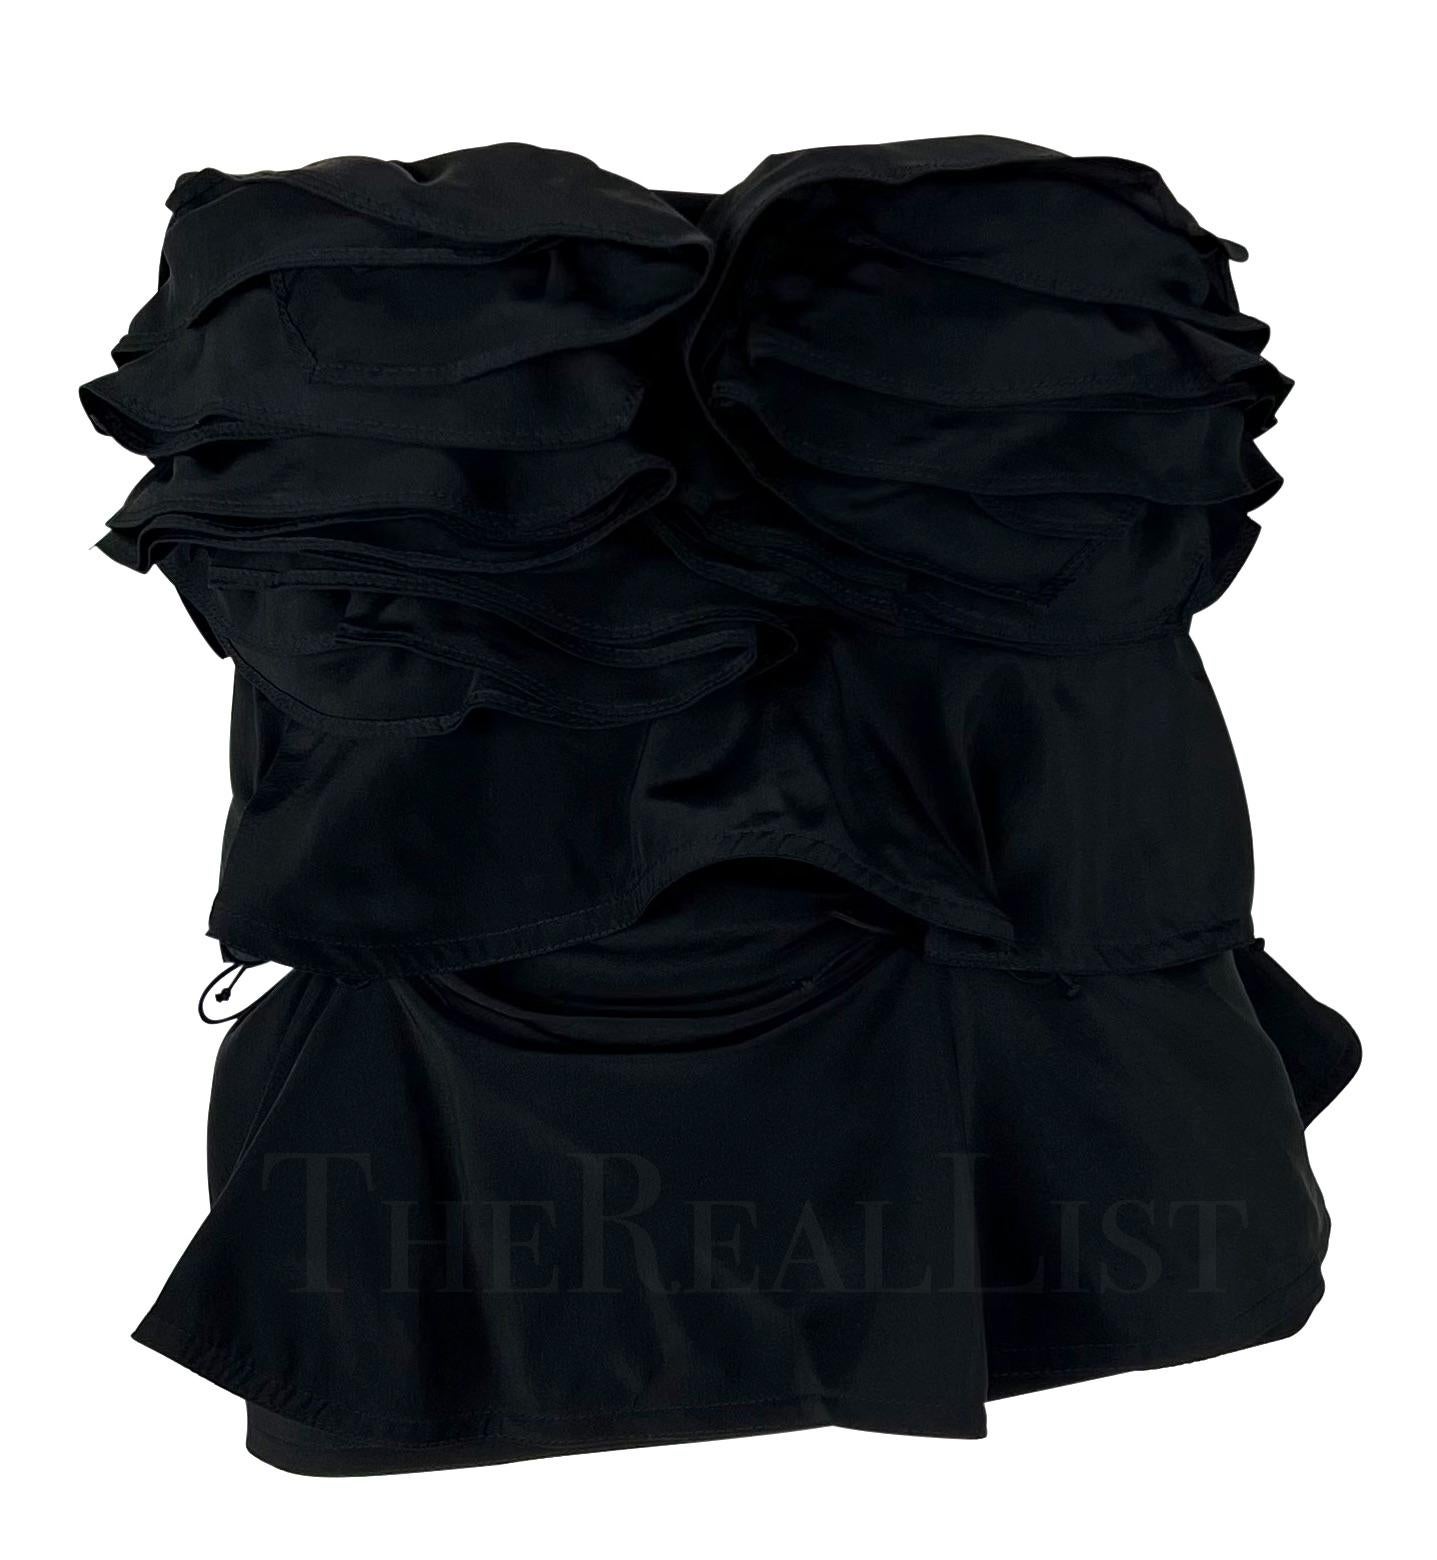 NWT F/W 2003 Yves Saint Laurent by Tom Ford Black Silk Ruffle Strapless Top In Excellent Condition For Sale In West Hollywood, CA